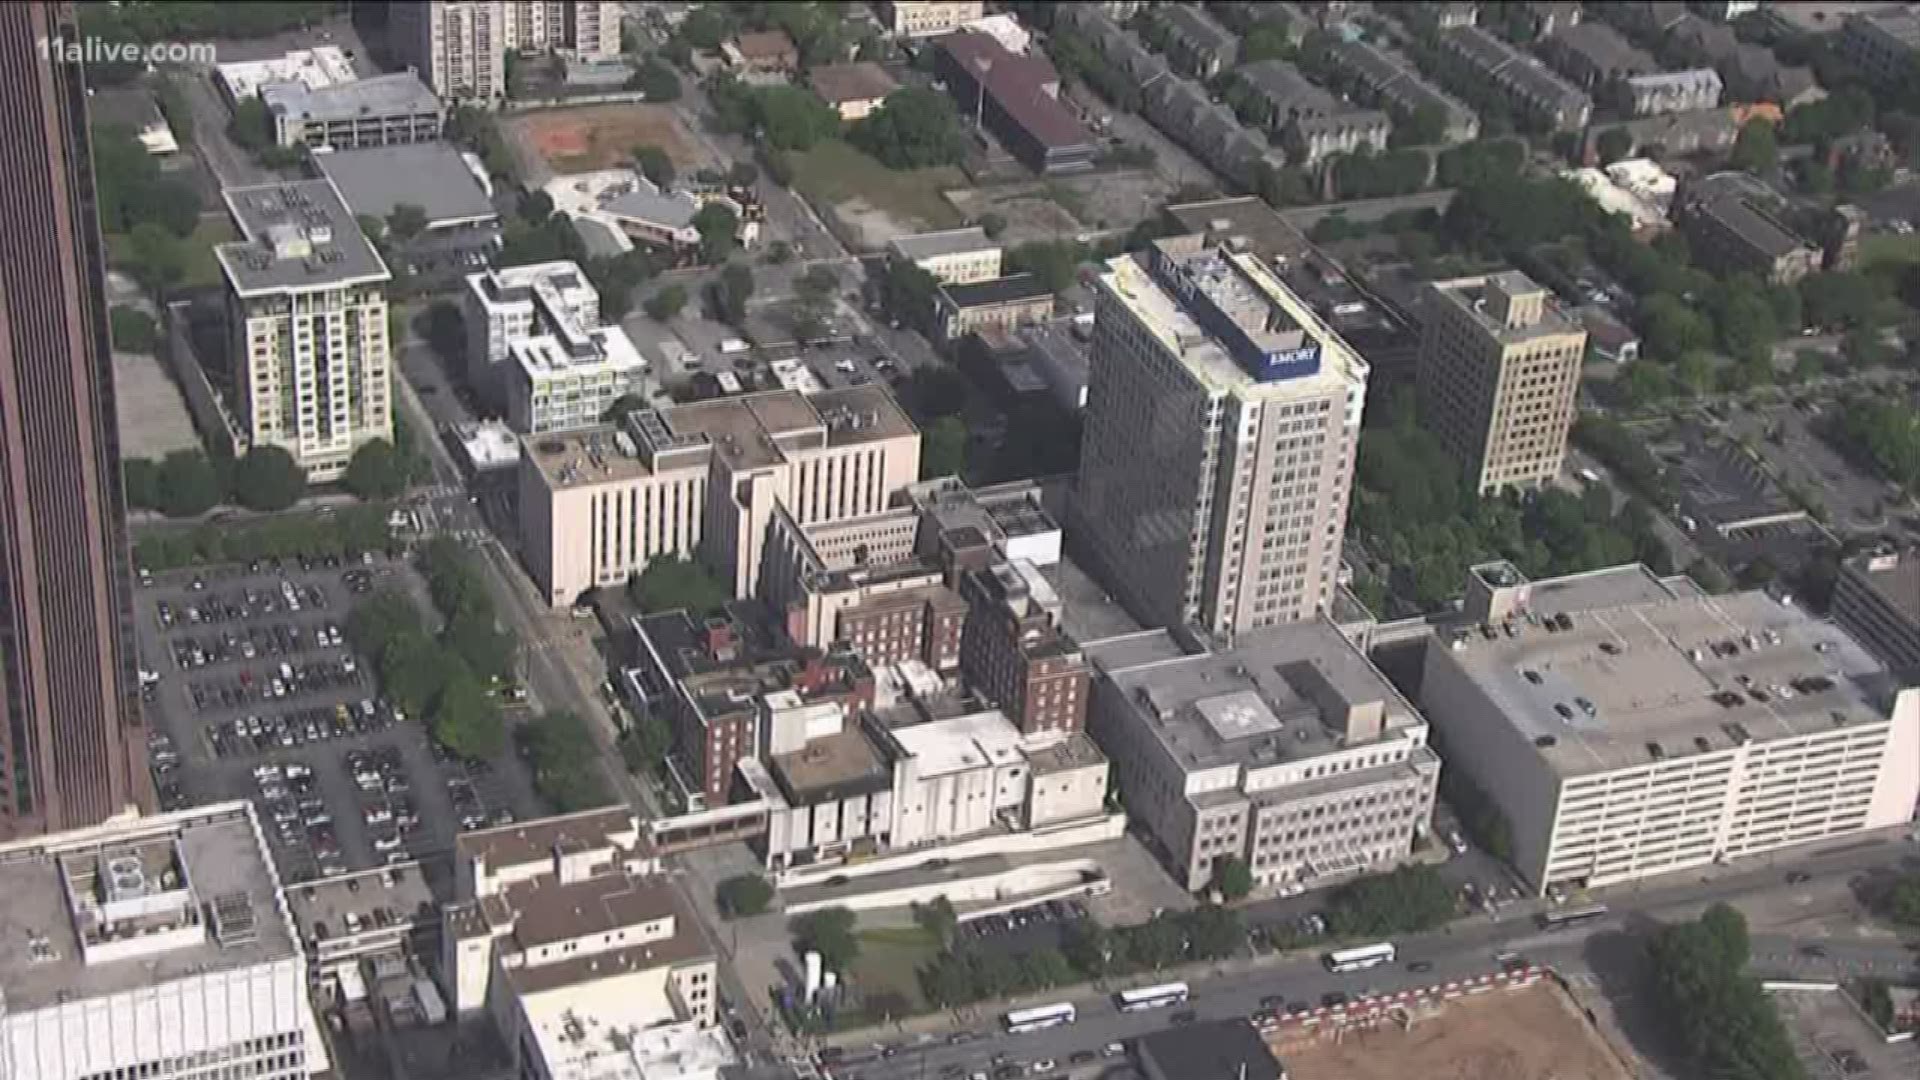 The Atlanta Business Chronicle reports that the tower will be connected to the existing hospital on Peachtree Street.